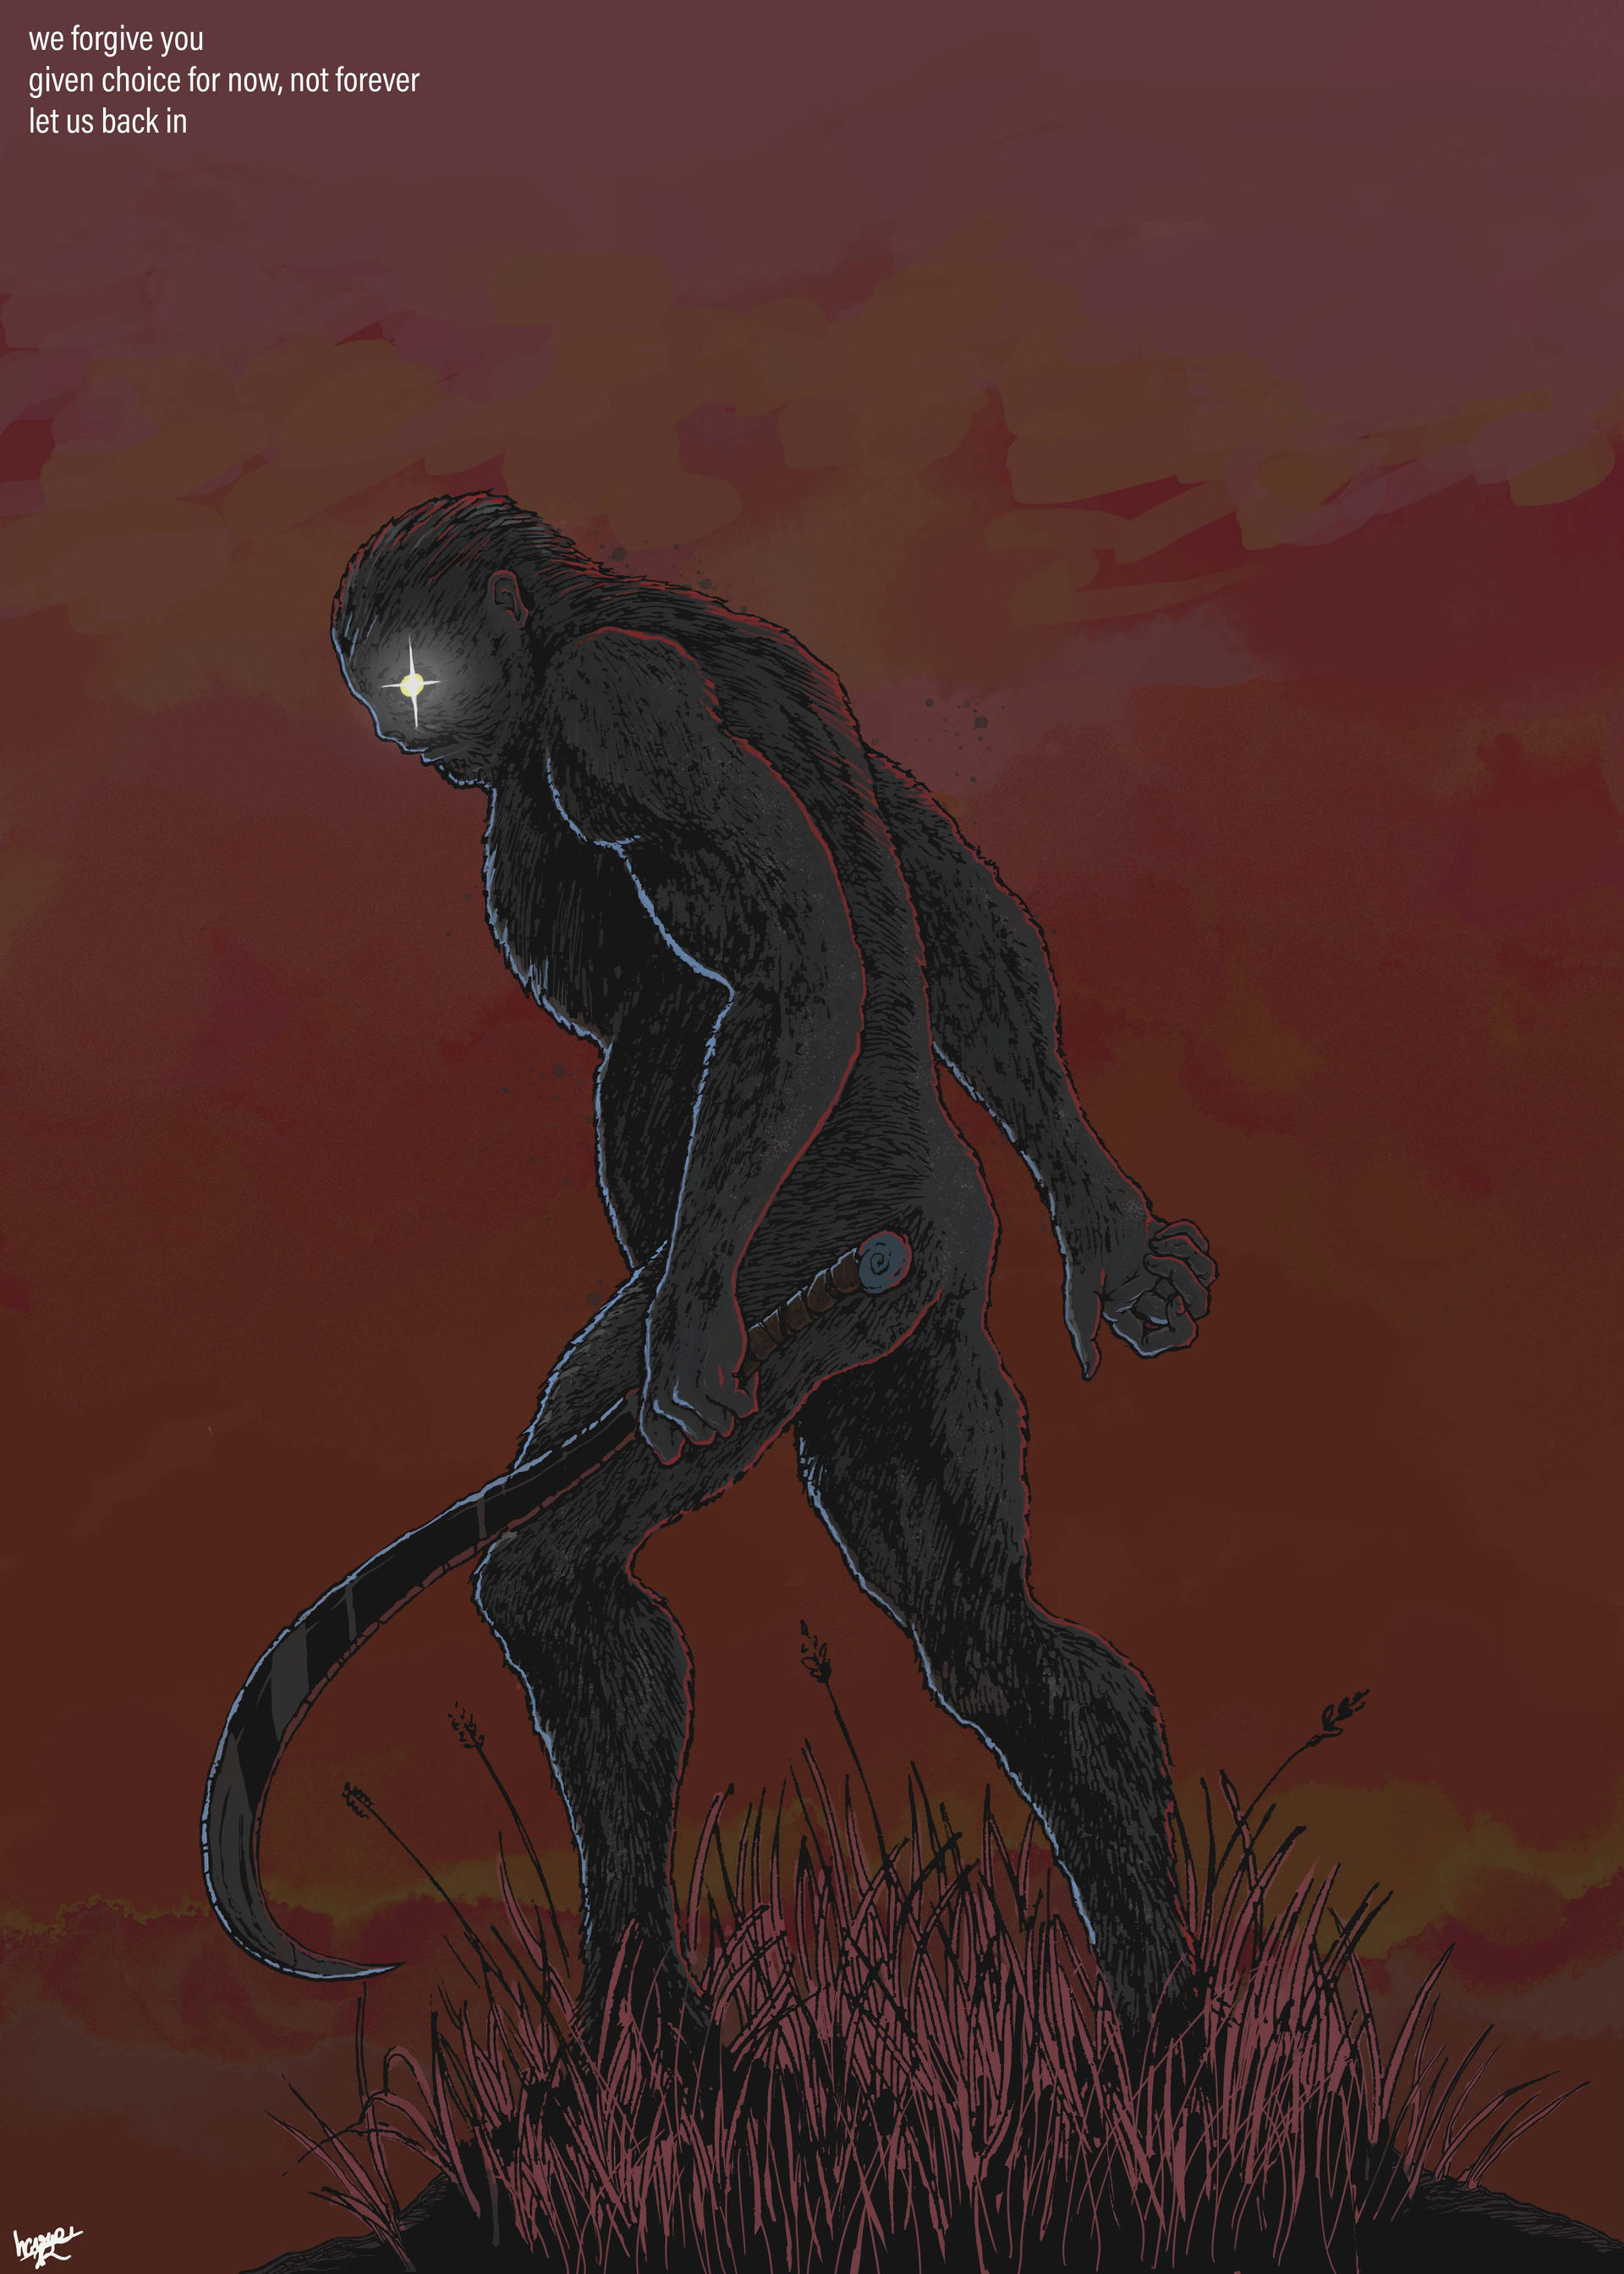 SCP-1000 - Bigfoot (SCP Animation), SCP Explained brings you SCP  Foundation KETER class object, SCP-1000 Animation. SCP-1000 is a nocturnal,  omnivorous ape. Adults range in size from 1.5, By The Infographics Show